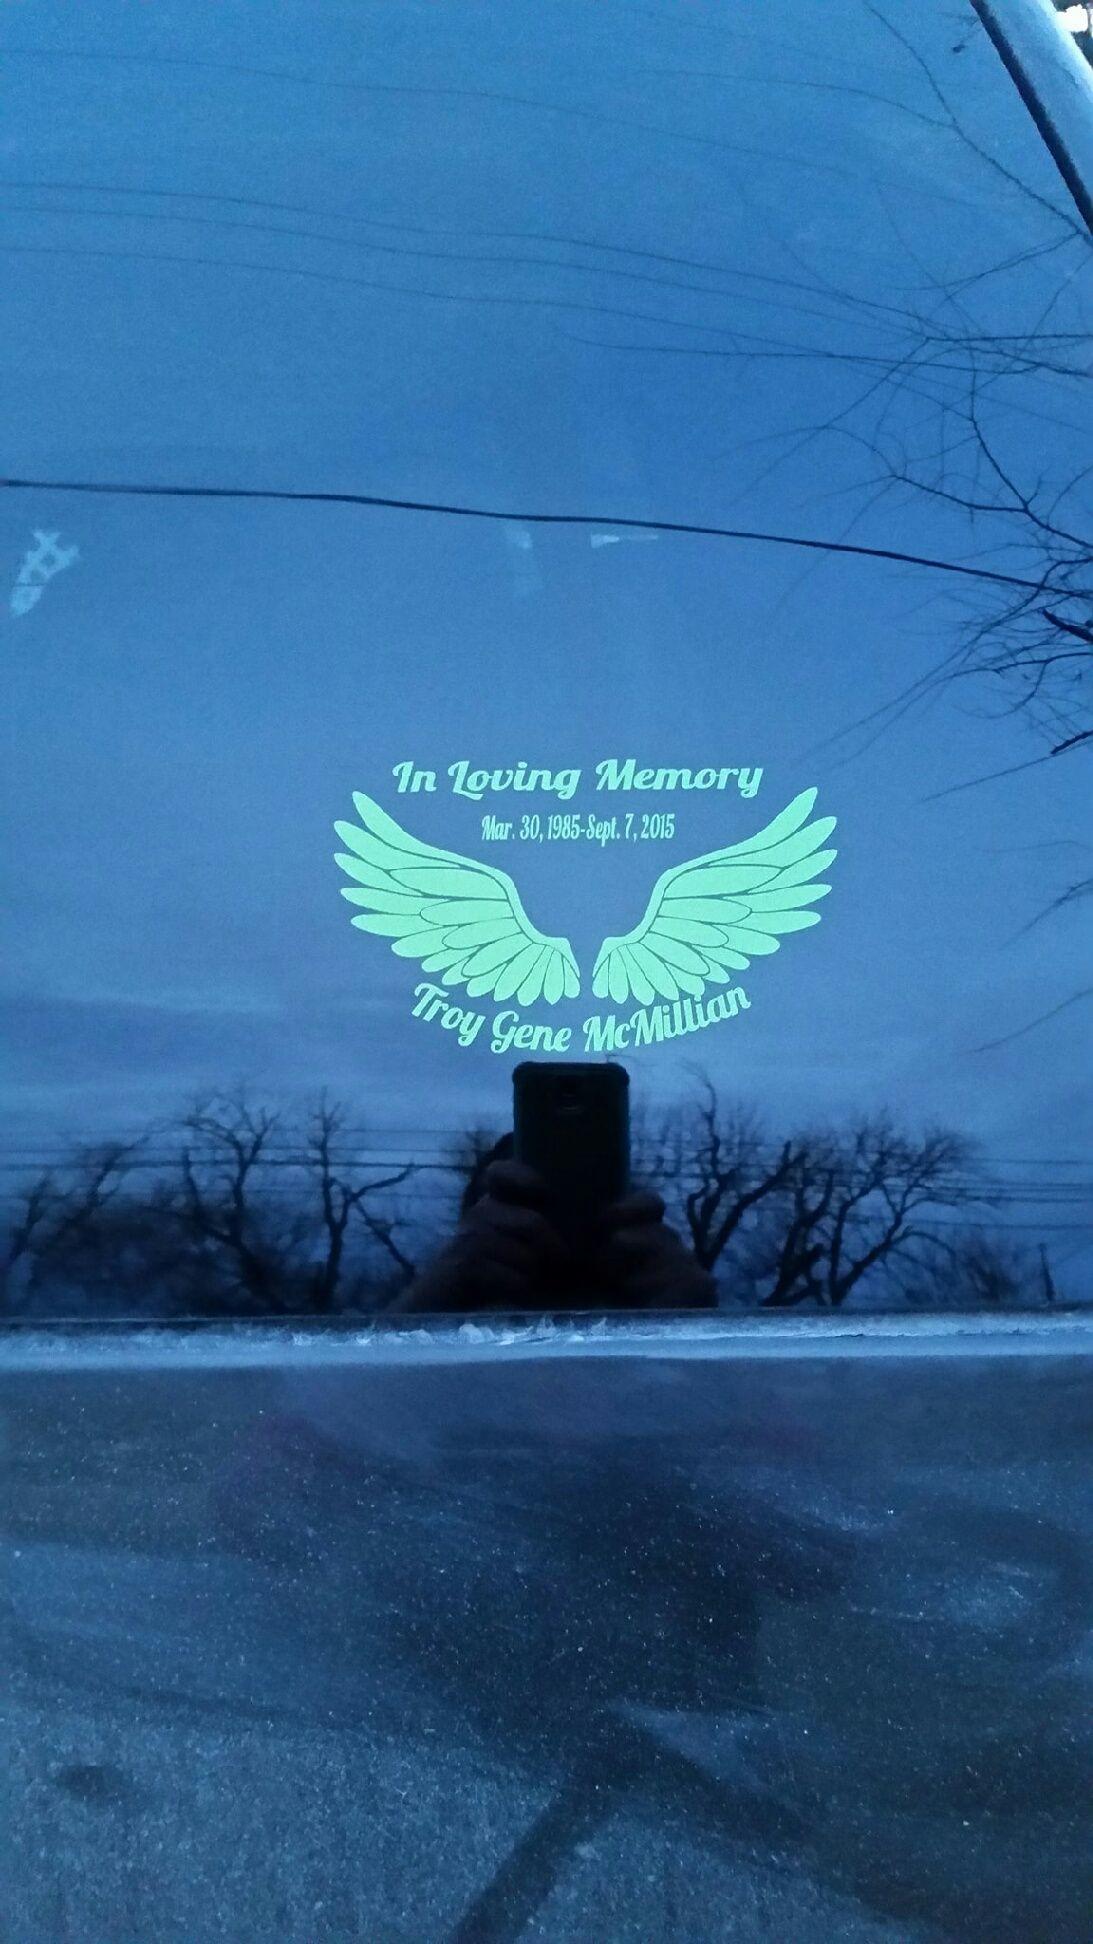 Customizable “In Loving Memory” Car Decals & Stickers